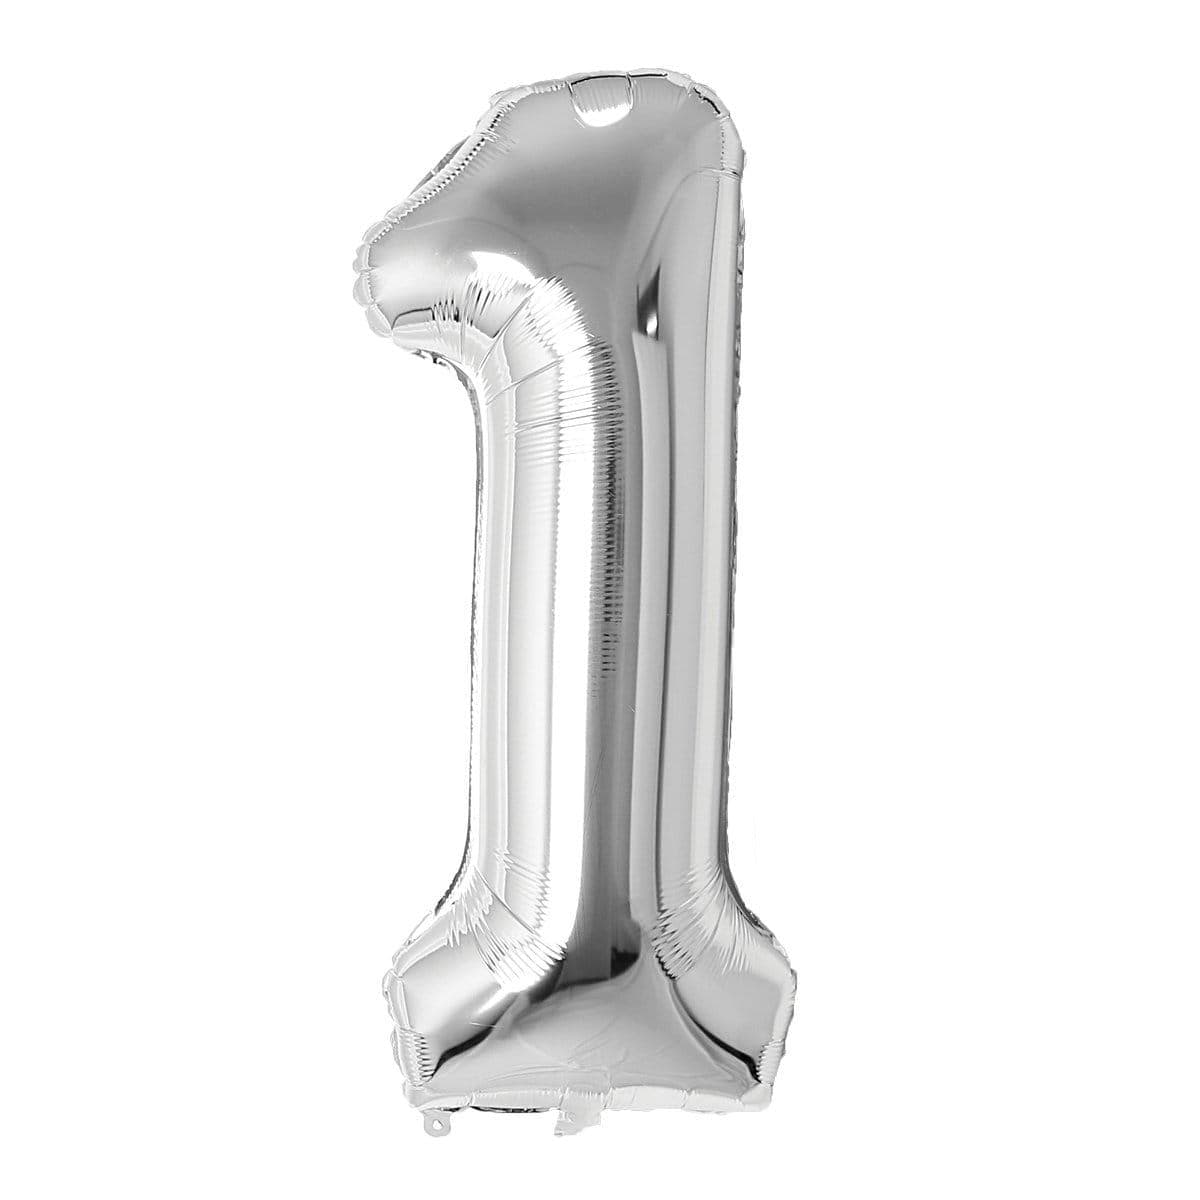 Buy Balloons Silver Number 1 Foil Balloon, 34 Inches sold at Party Expert